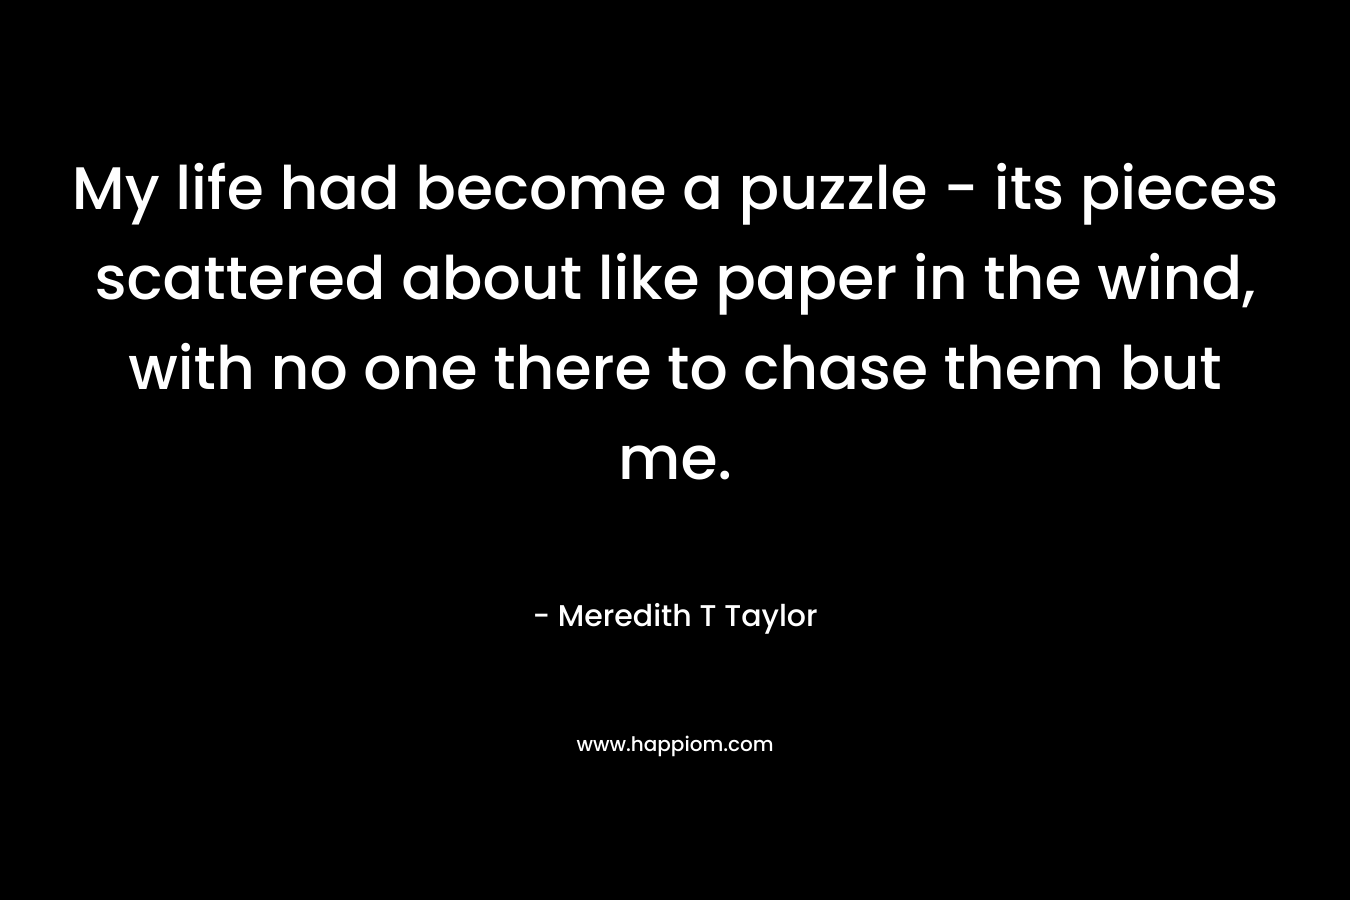 My life had become a puzzle – its pieces scattered about like paper in the wind, with no one there to chase them but me. – Meredith T Taylor